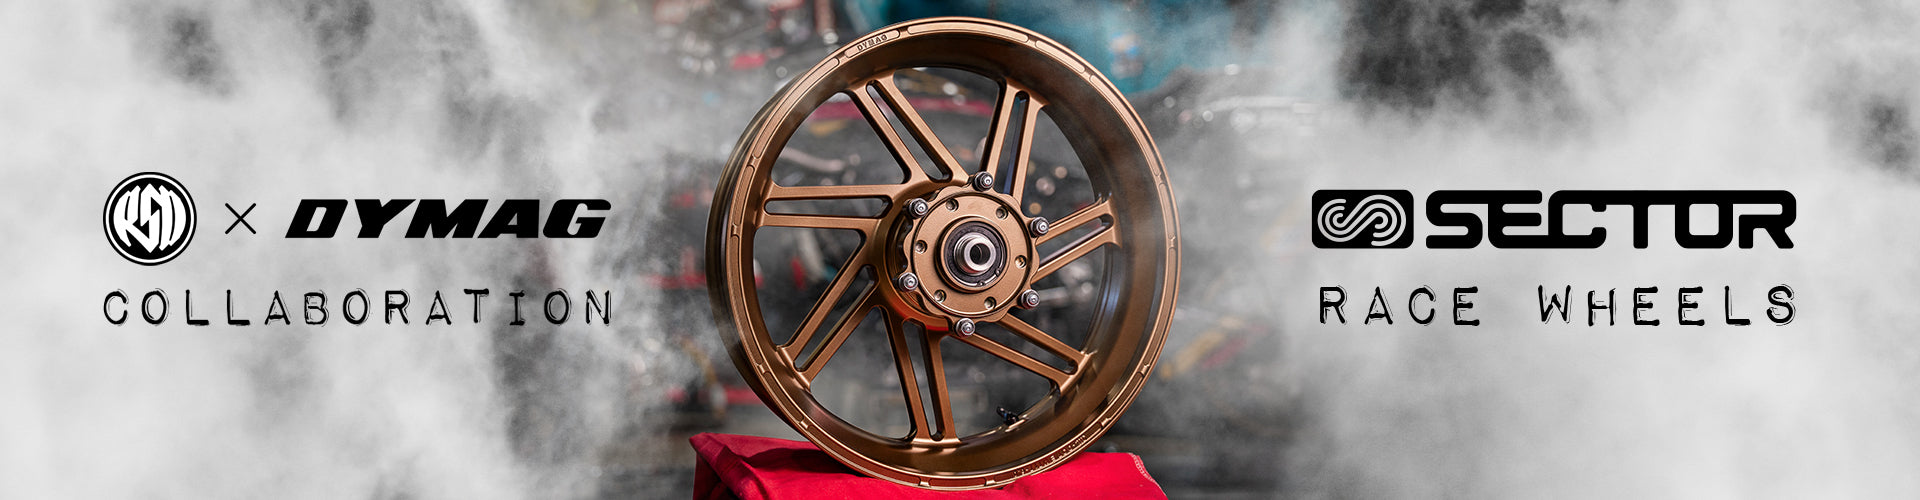 Promotional banner featuring a collaboration between Dymag and Sector Race Wheels. The image showcases a high-performance racing wheel in bronze, centered on a smoky background with the logos of 'Dymag' and 'Sector Race Wheels' on either side, highlighting the partnership.